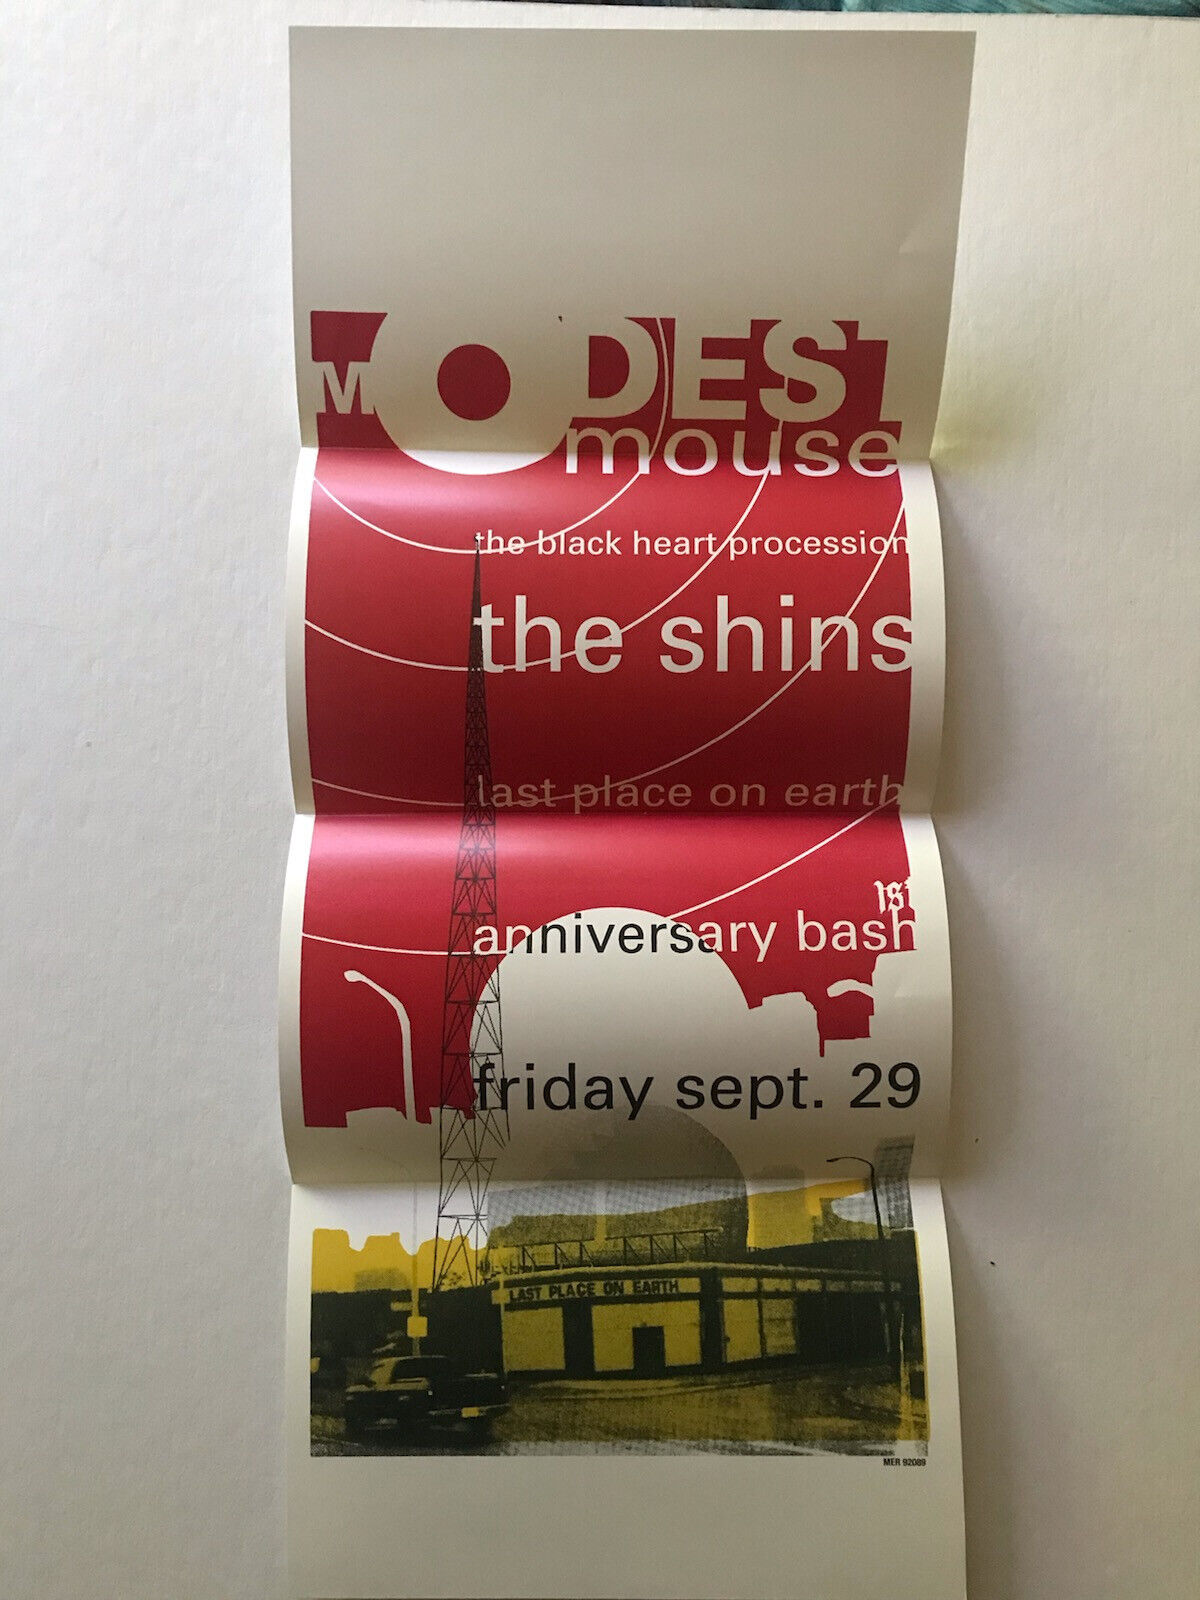 MODEST MOUSE Shins concert poster 9x22 Last place on Earth